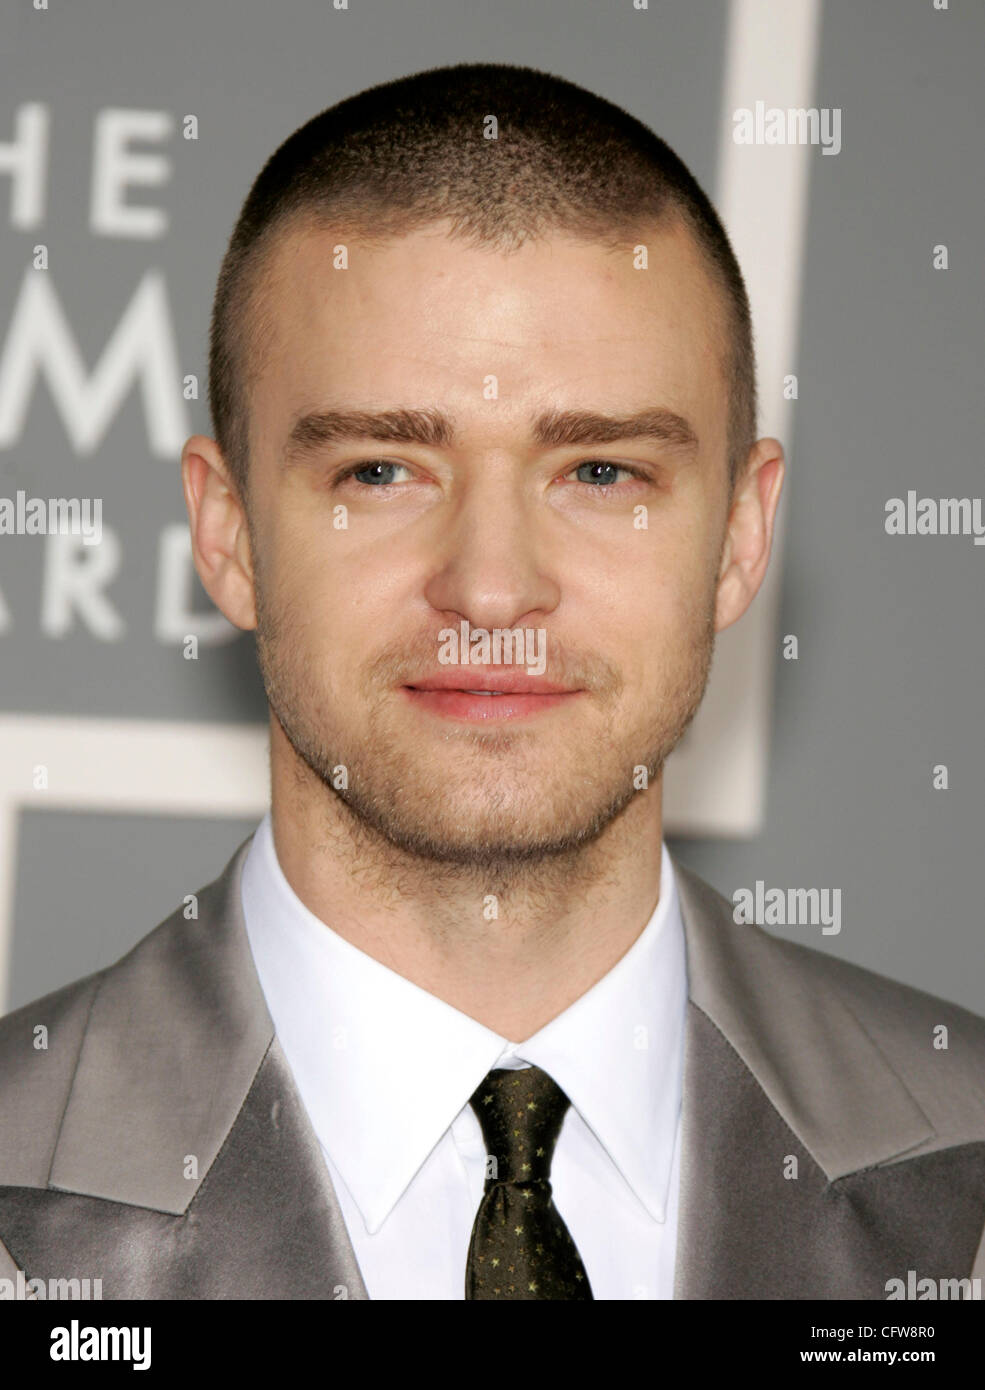 Feb 11, 2007; Los Angeles, CA, USA; GRAMMYS 2007: JUSTIN TIMBERLAKE arriving at the 49th Annual Grammy Awards held at Staples Center in Los Angeles. Mandatory Credit: Photo by Lisa O'Connor/ZUMA Press. (©) Copyright 2007 by Lisa O'Connor Stock Photo